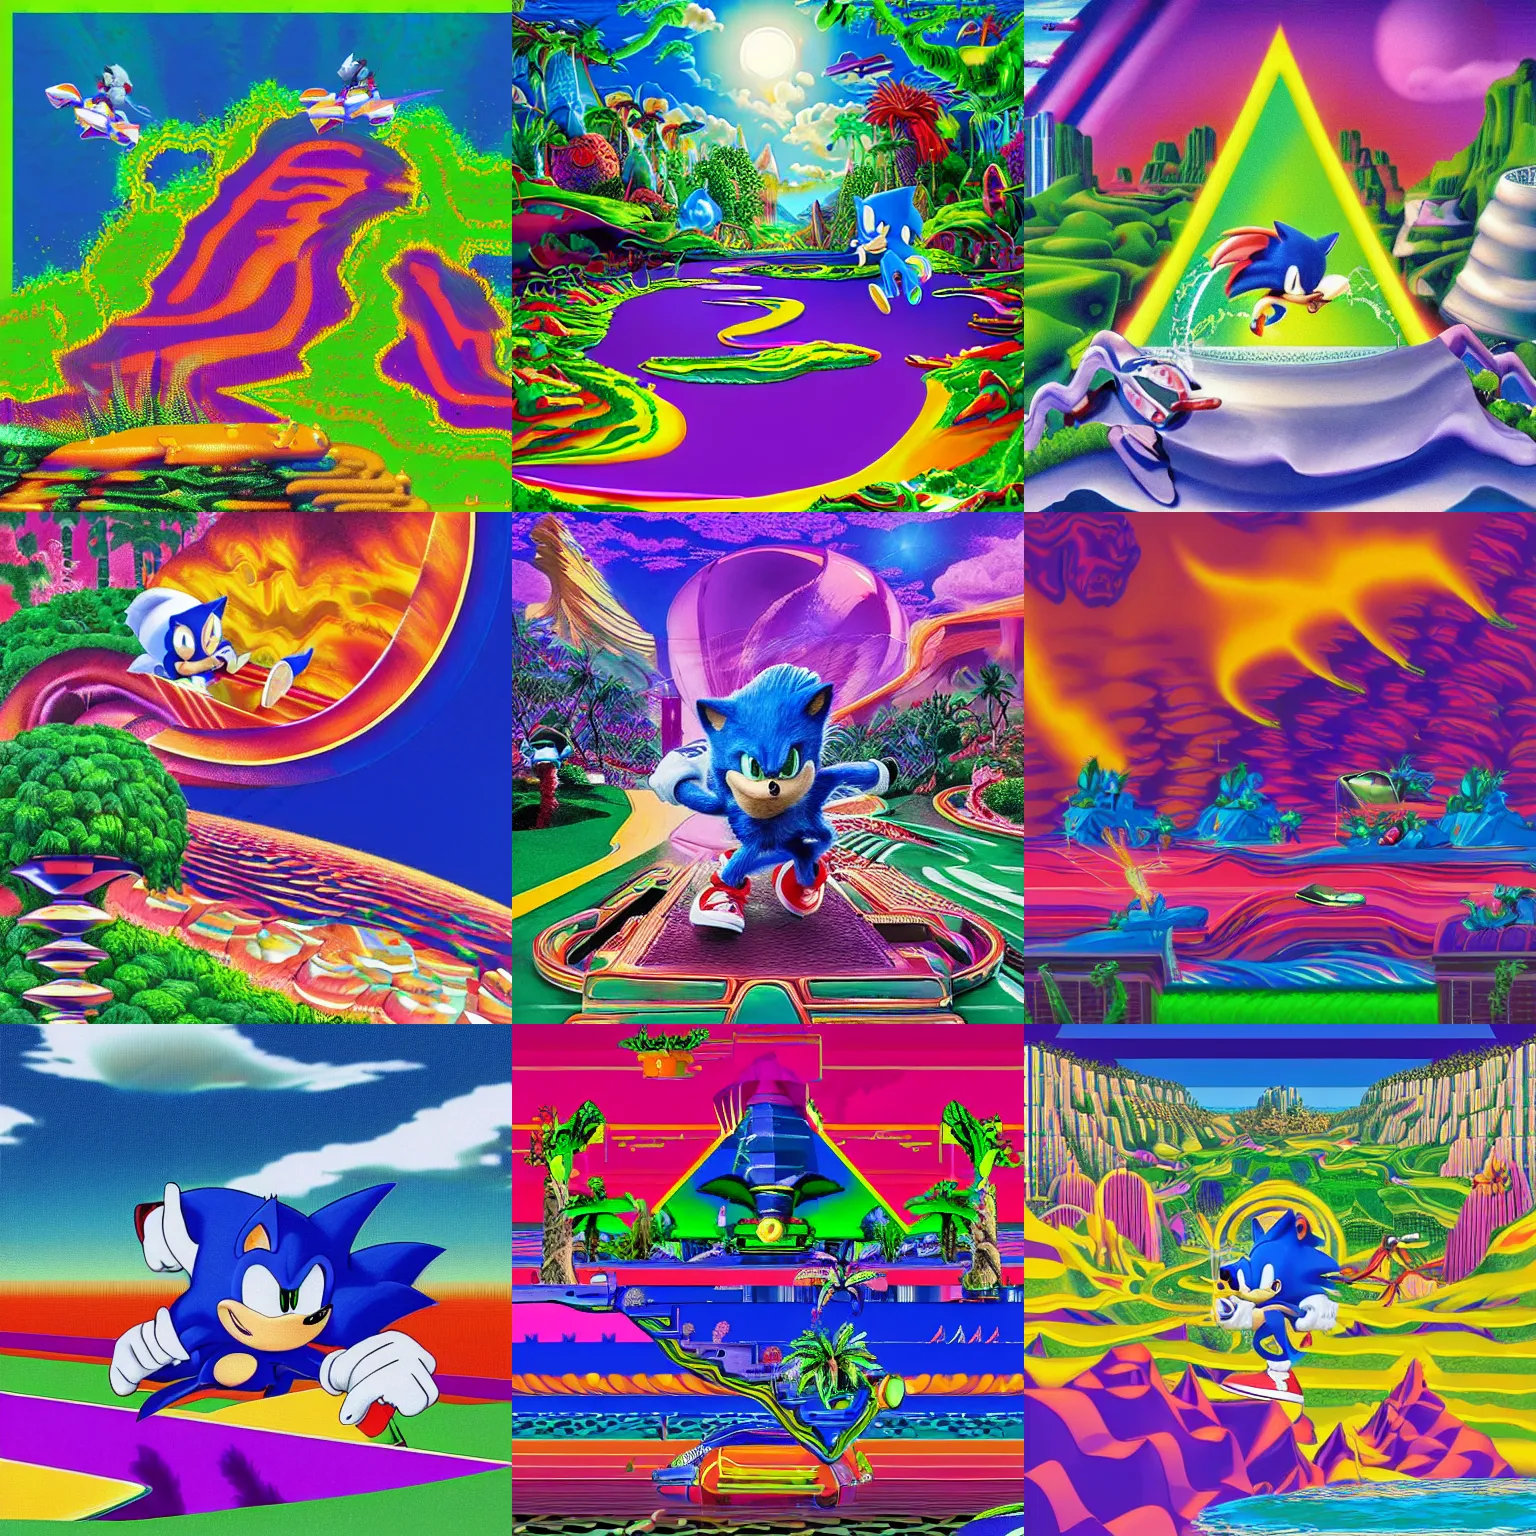 Prompt: sonic the hedgehog in a recursive surreal, sharp, detailed professional, high quality airbrush art MGMT tame impala album cover of a liquid dissolving synthwave vaporwave LSD DMT blue sonic the hedgehog surfing through terragen landscape, purple checkerboard plane, 1990s 1992 Sega Genesis video game album cover,